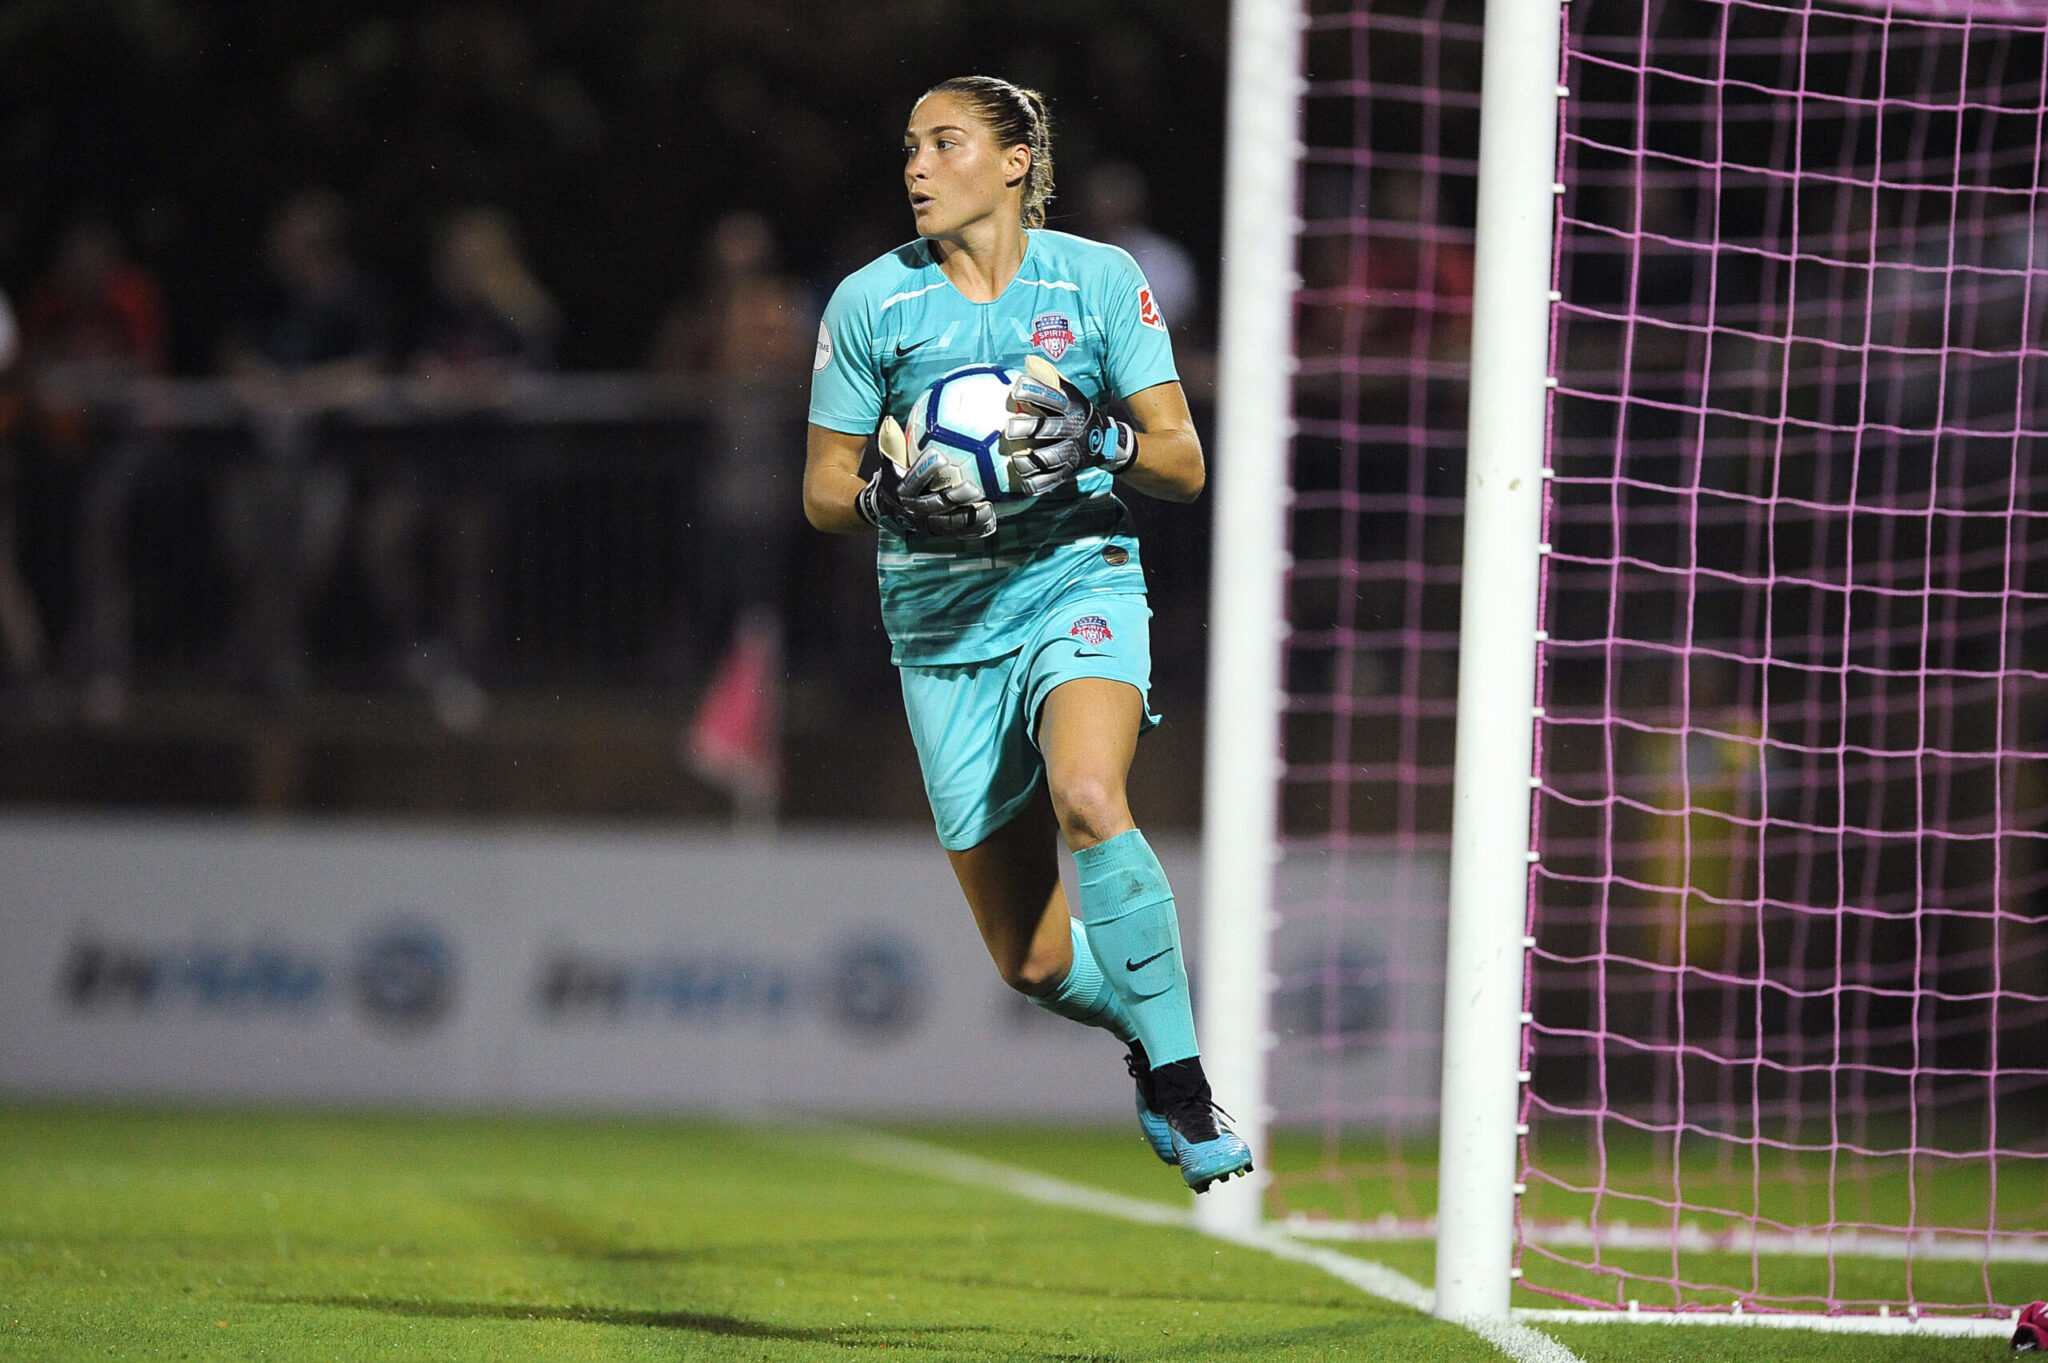 Aubrey Bledsoe nominated for NWSL Save of the Week Featured Image